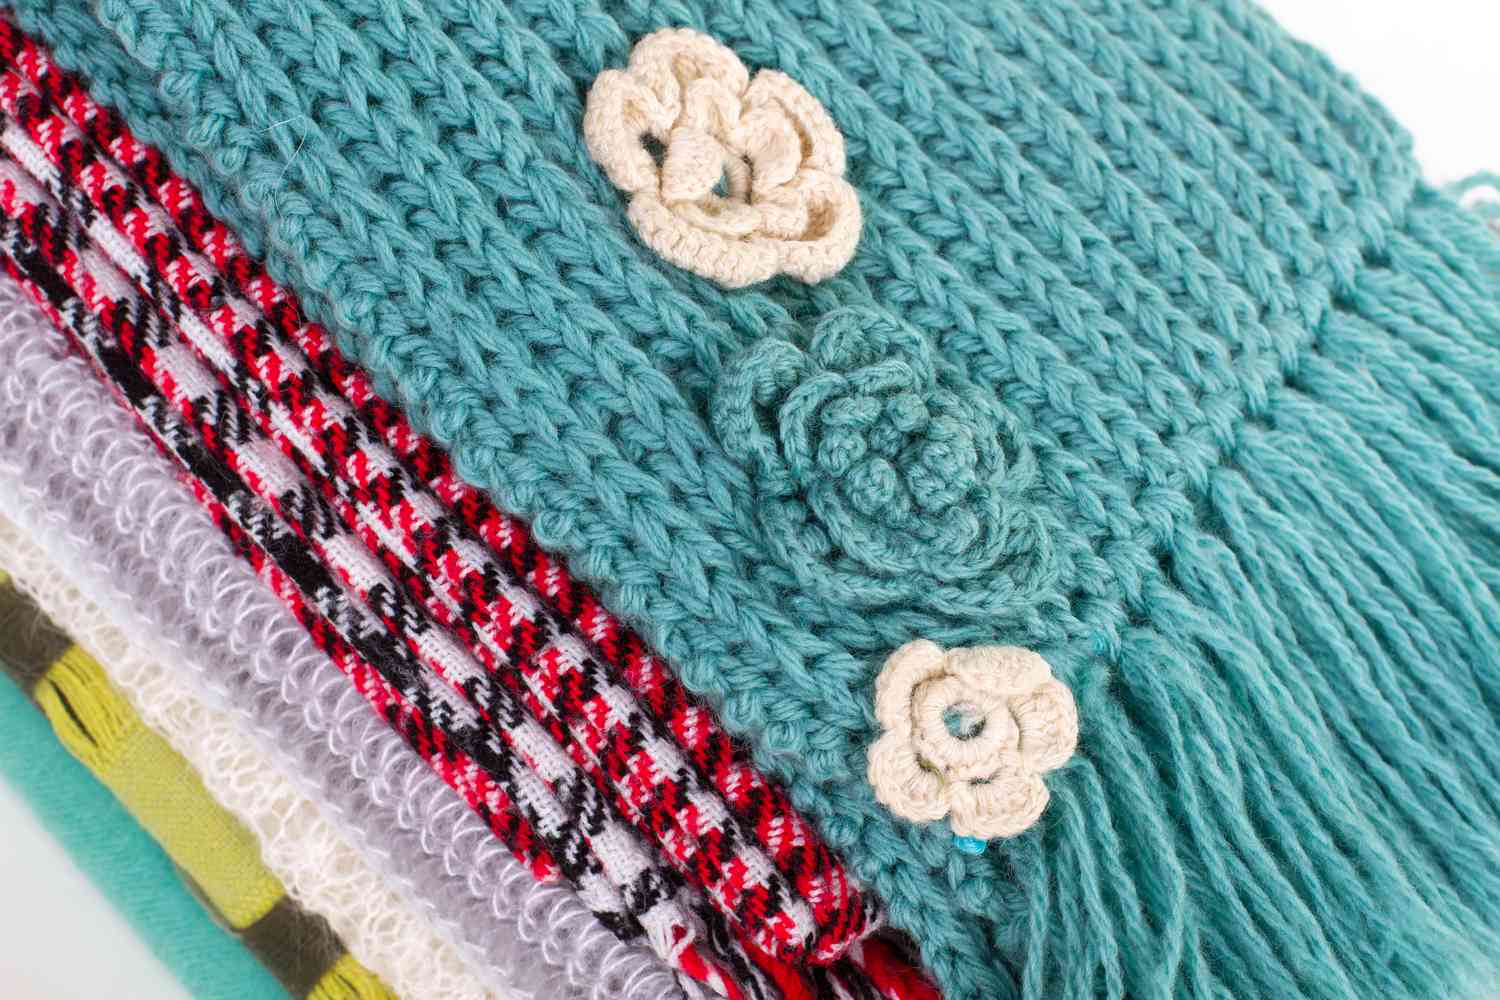 Beautiful crocheted flowers on the scarf.